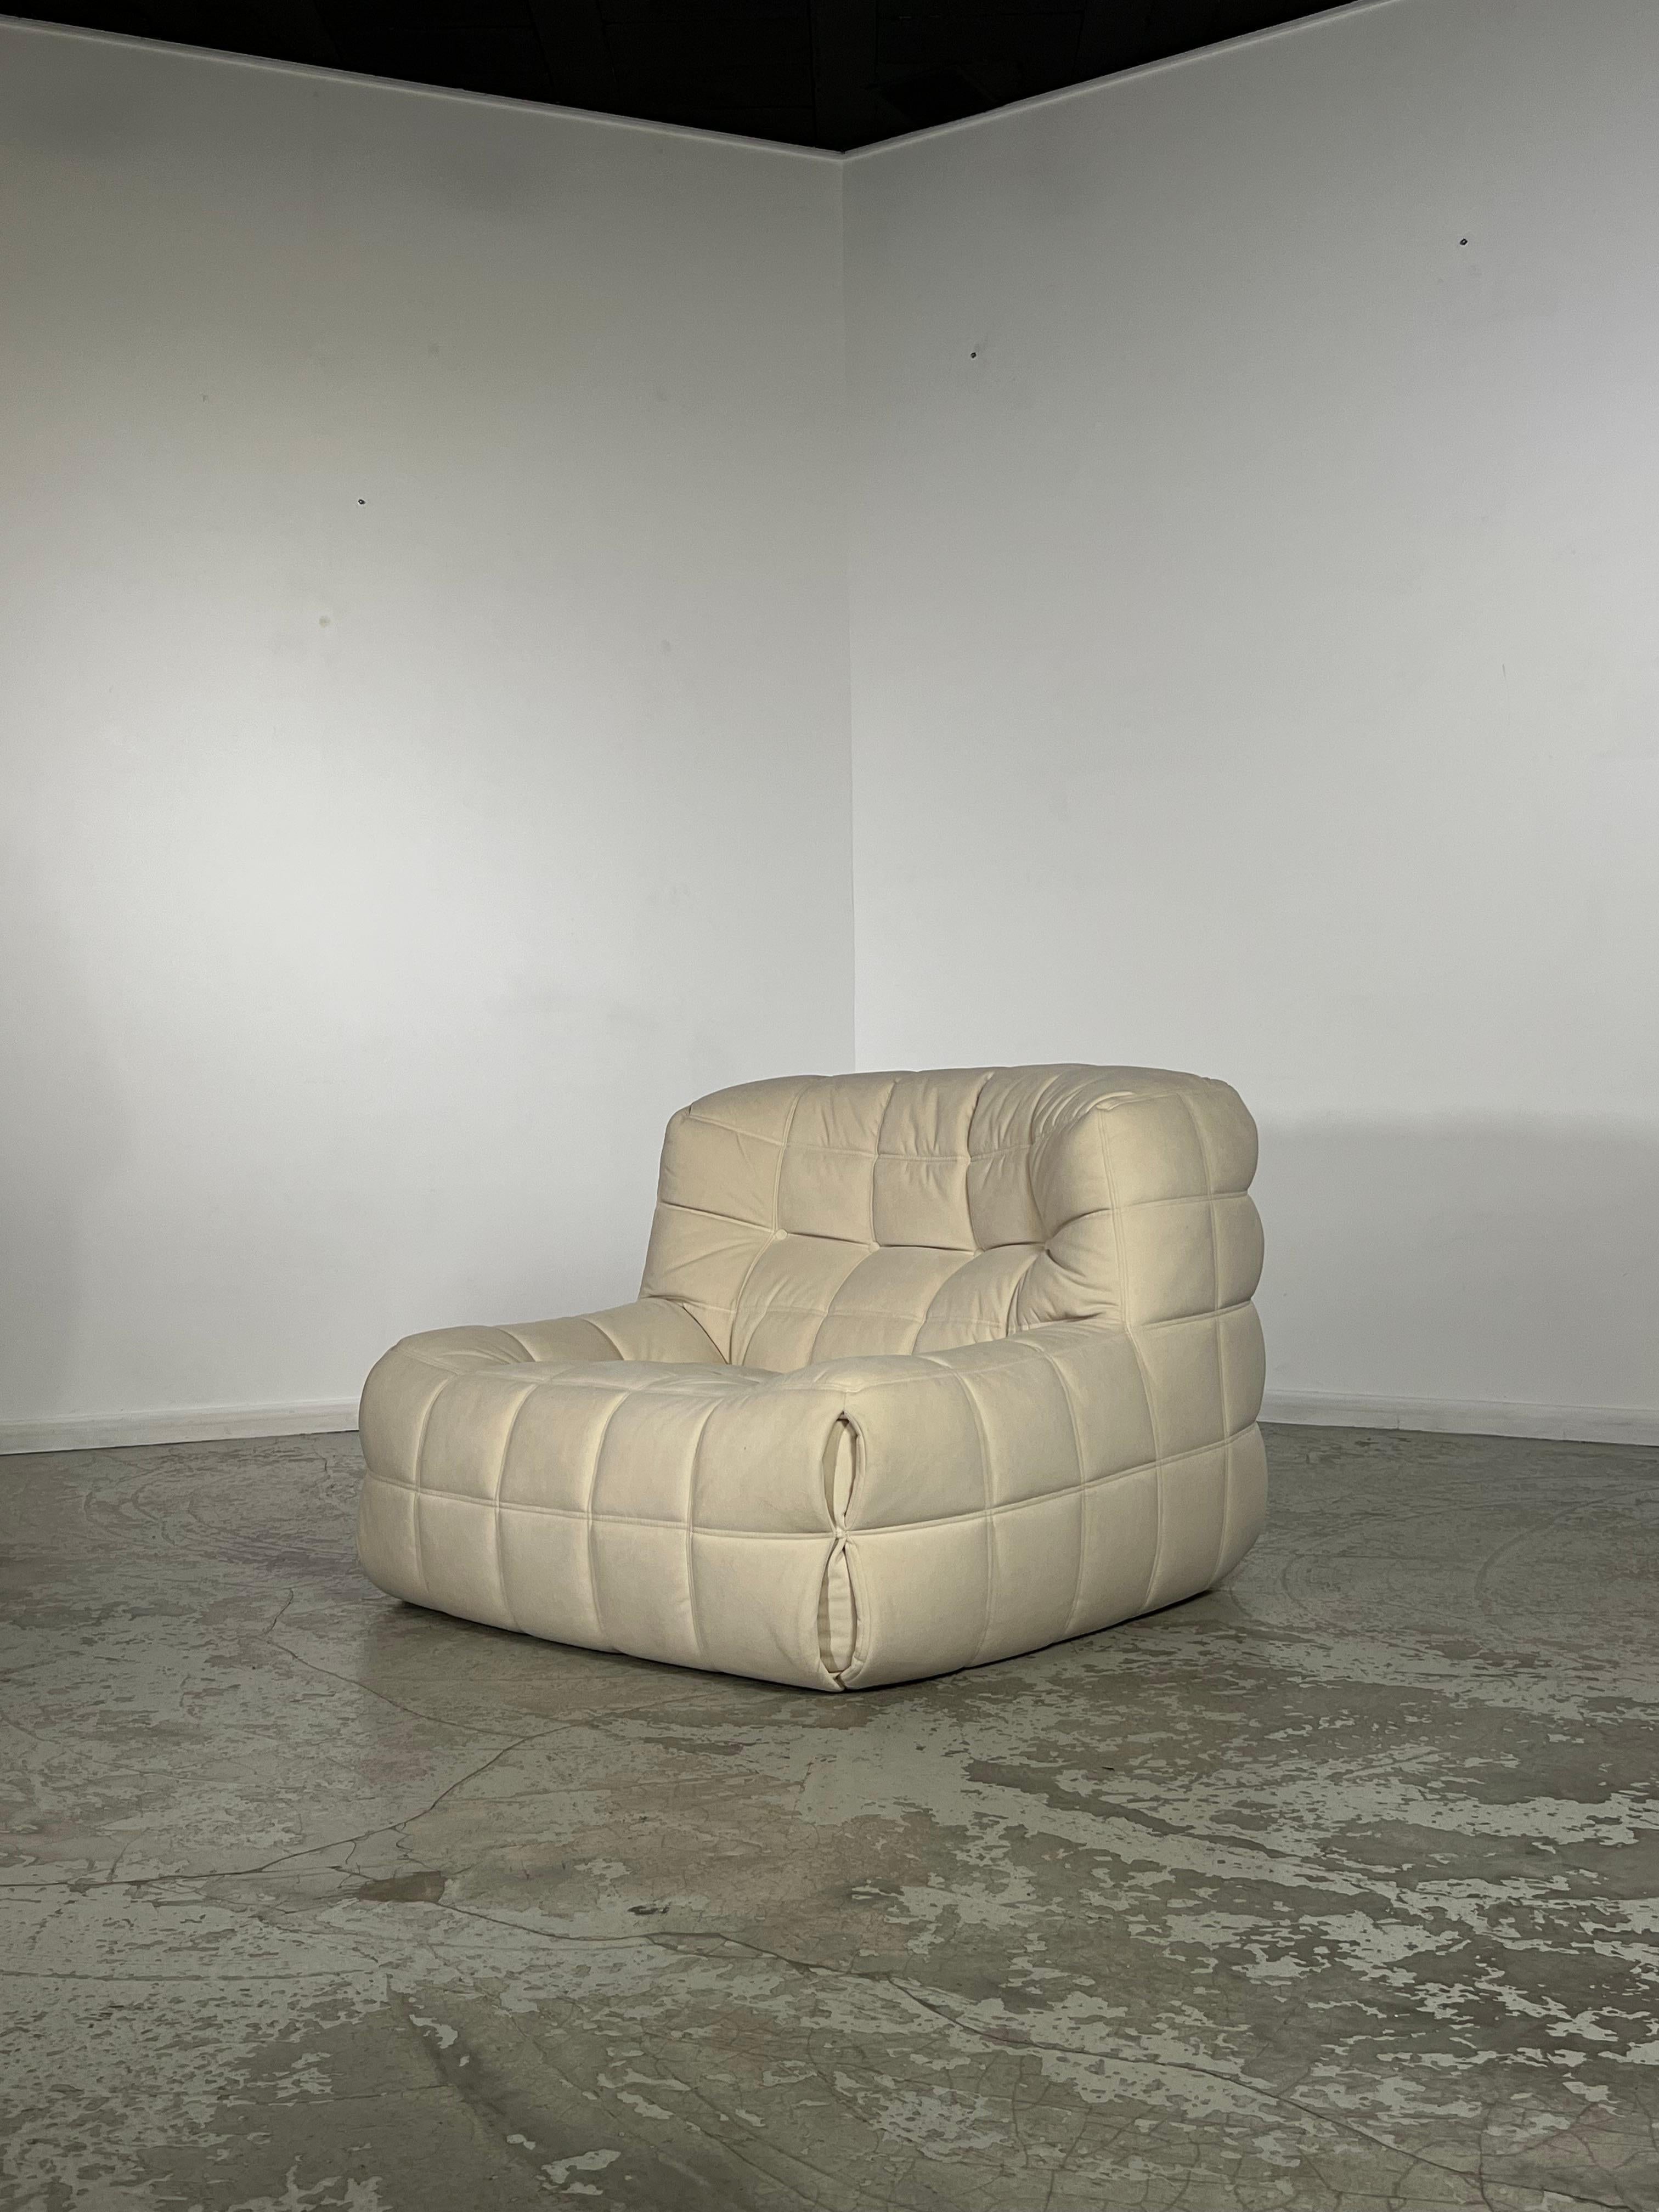 This armchair was designed by Michel Ducaroy for Ligne Roset in the 1970s. Ducaroy will propose several variations of this piece: sofa (2 or 3 seats), corner sofa or pouf. This range will be proposed shortly after the iconic Togo, following its line